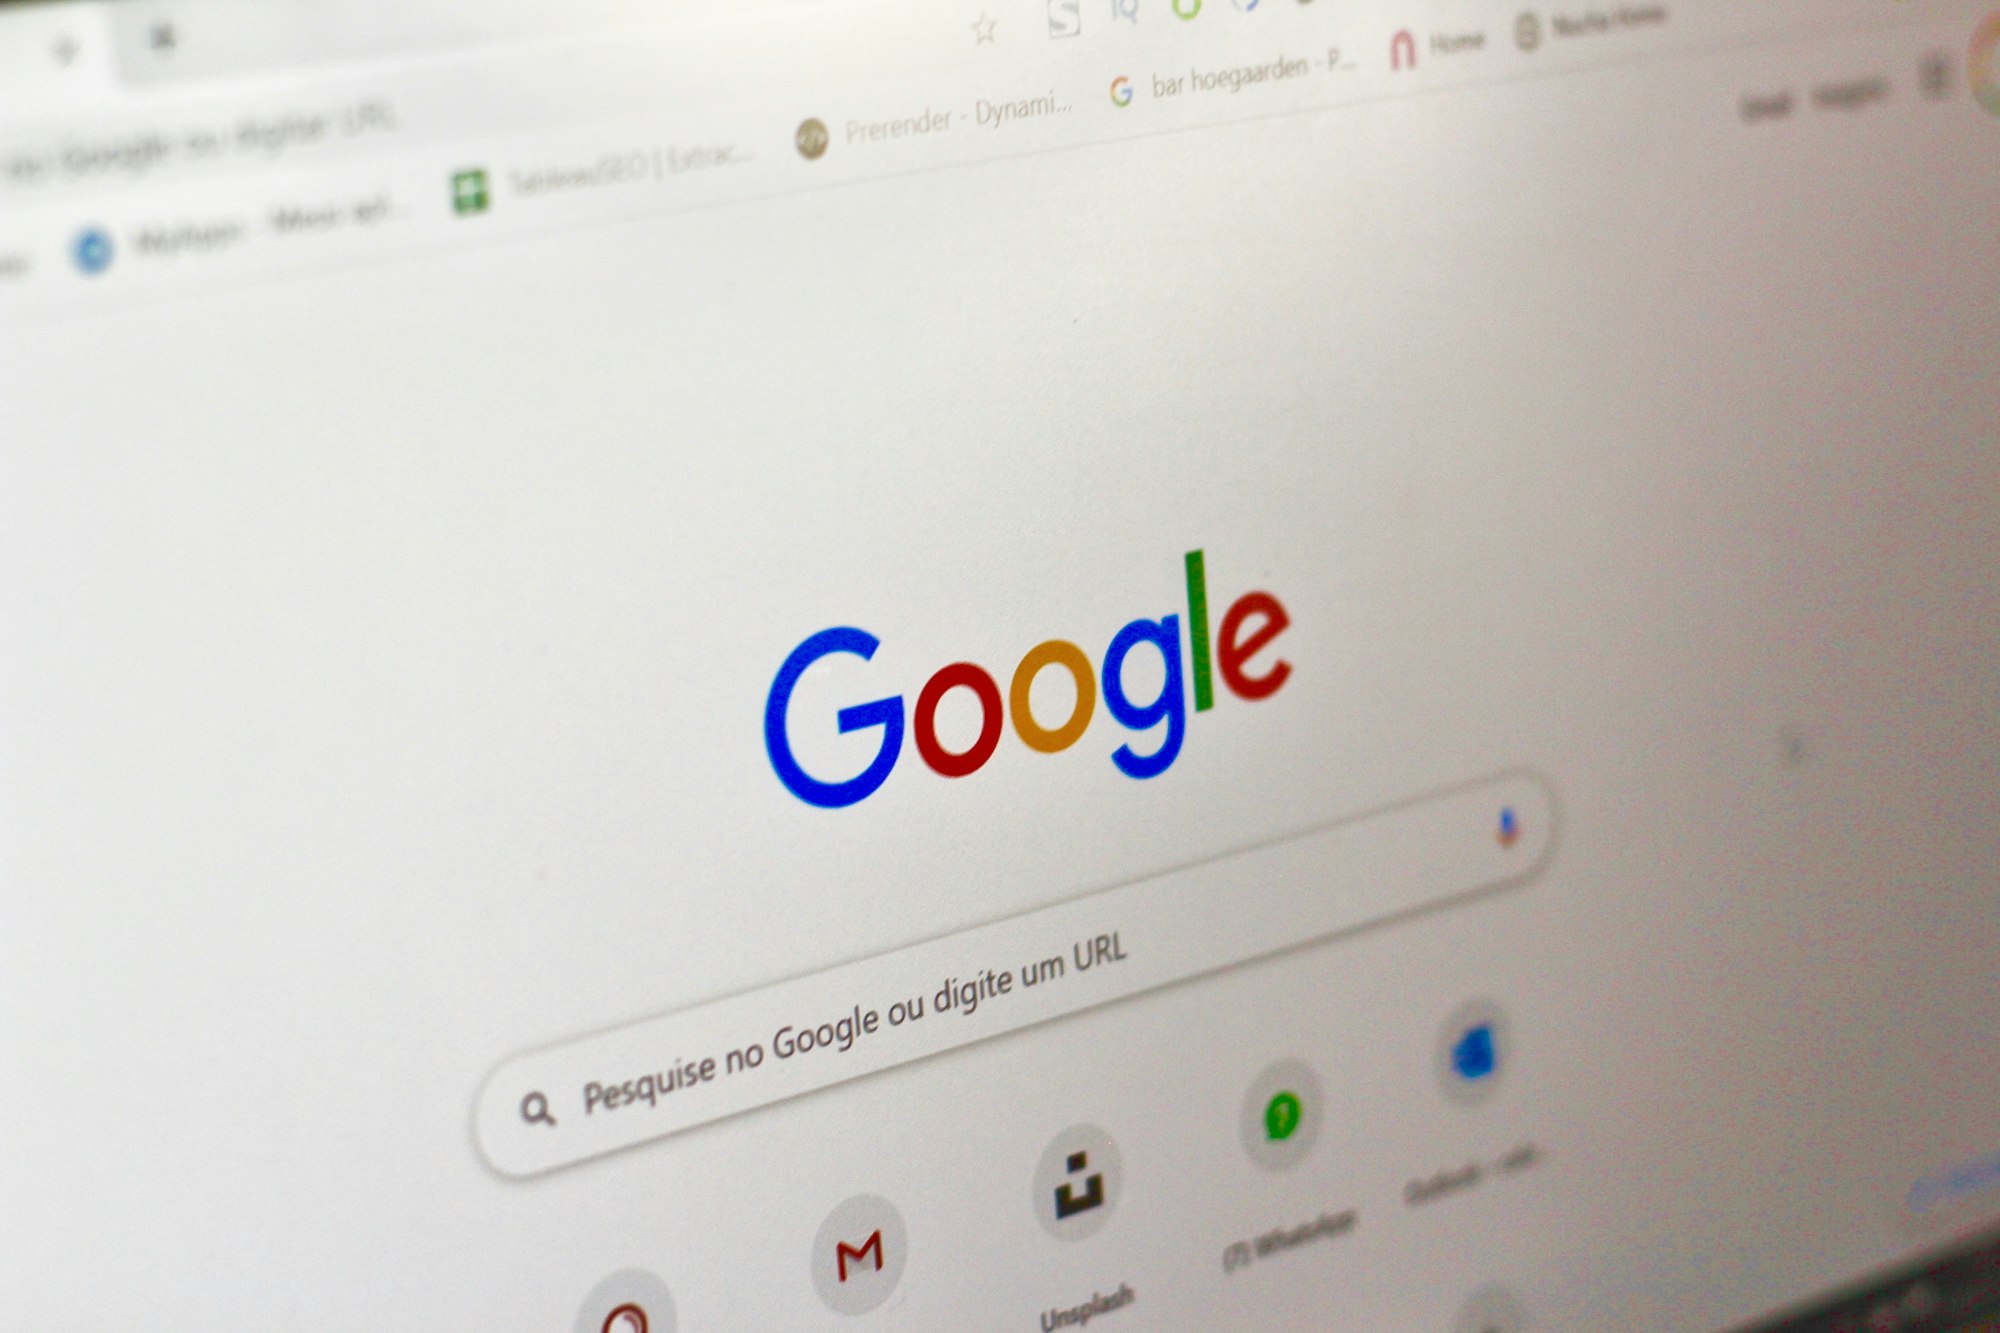 How to Reverse Image Search on Google